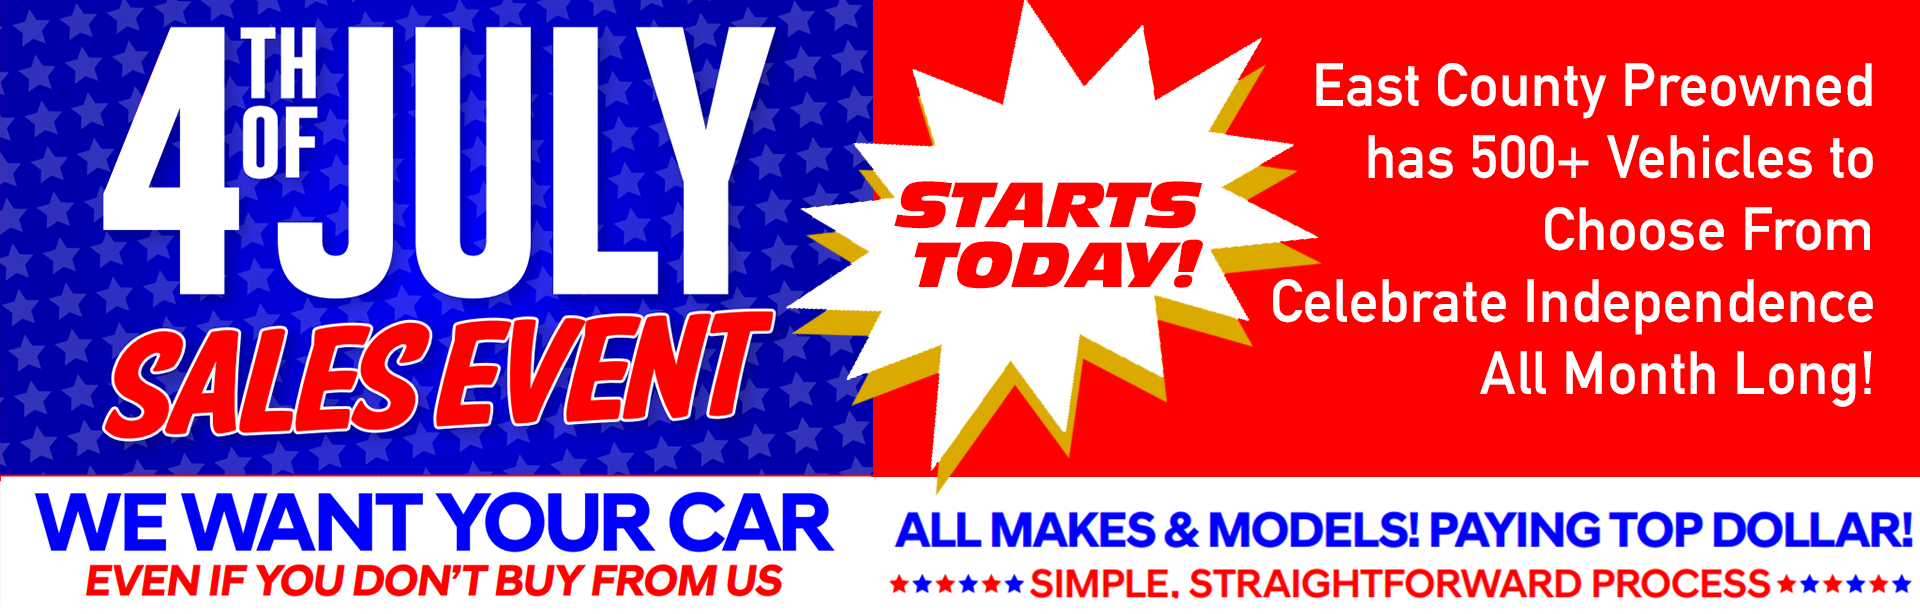 July 4th Sales Event